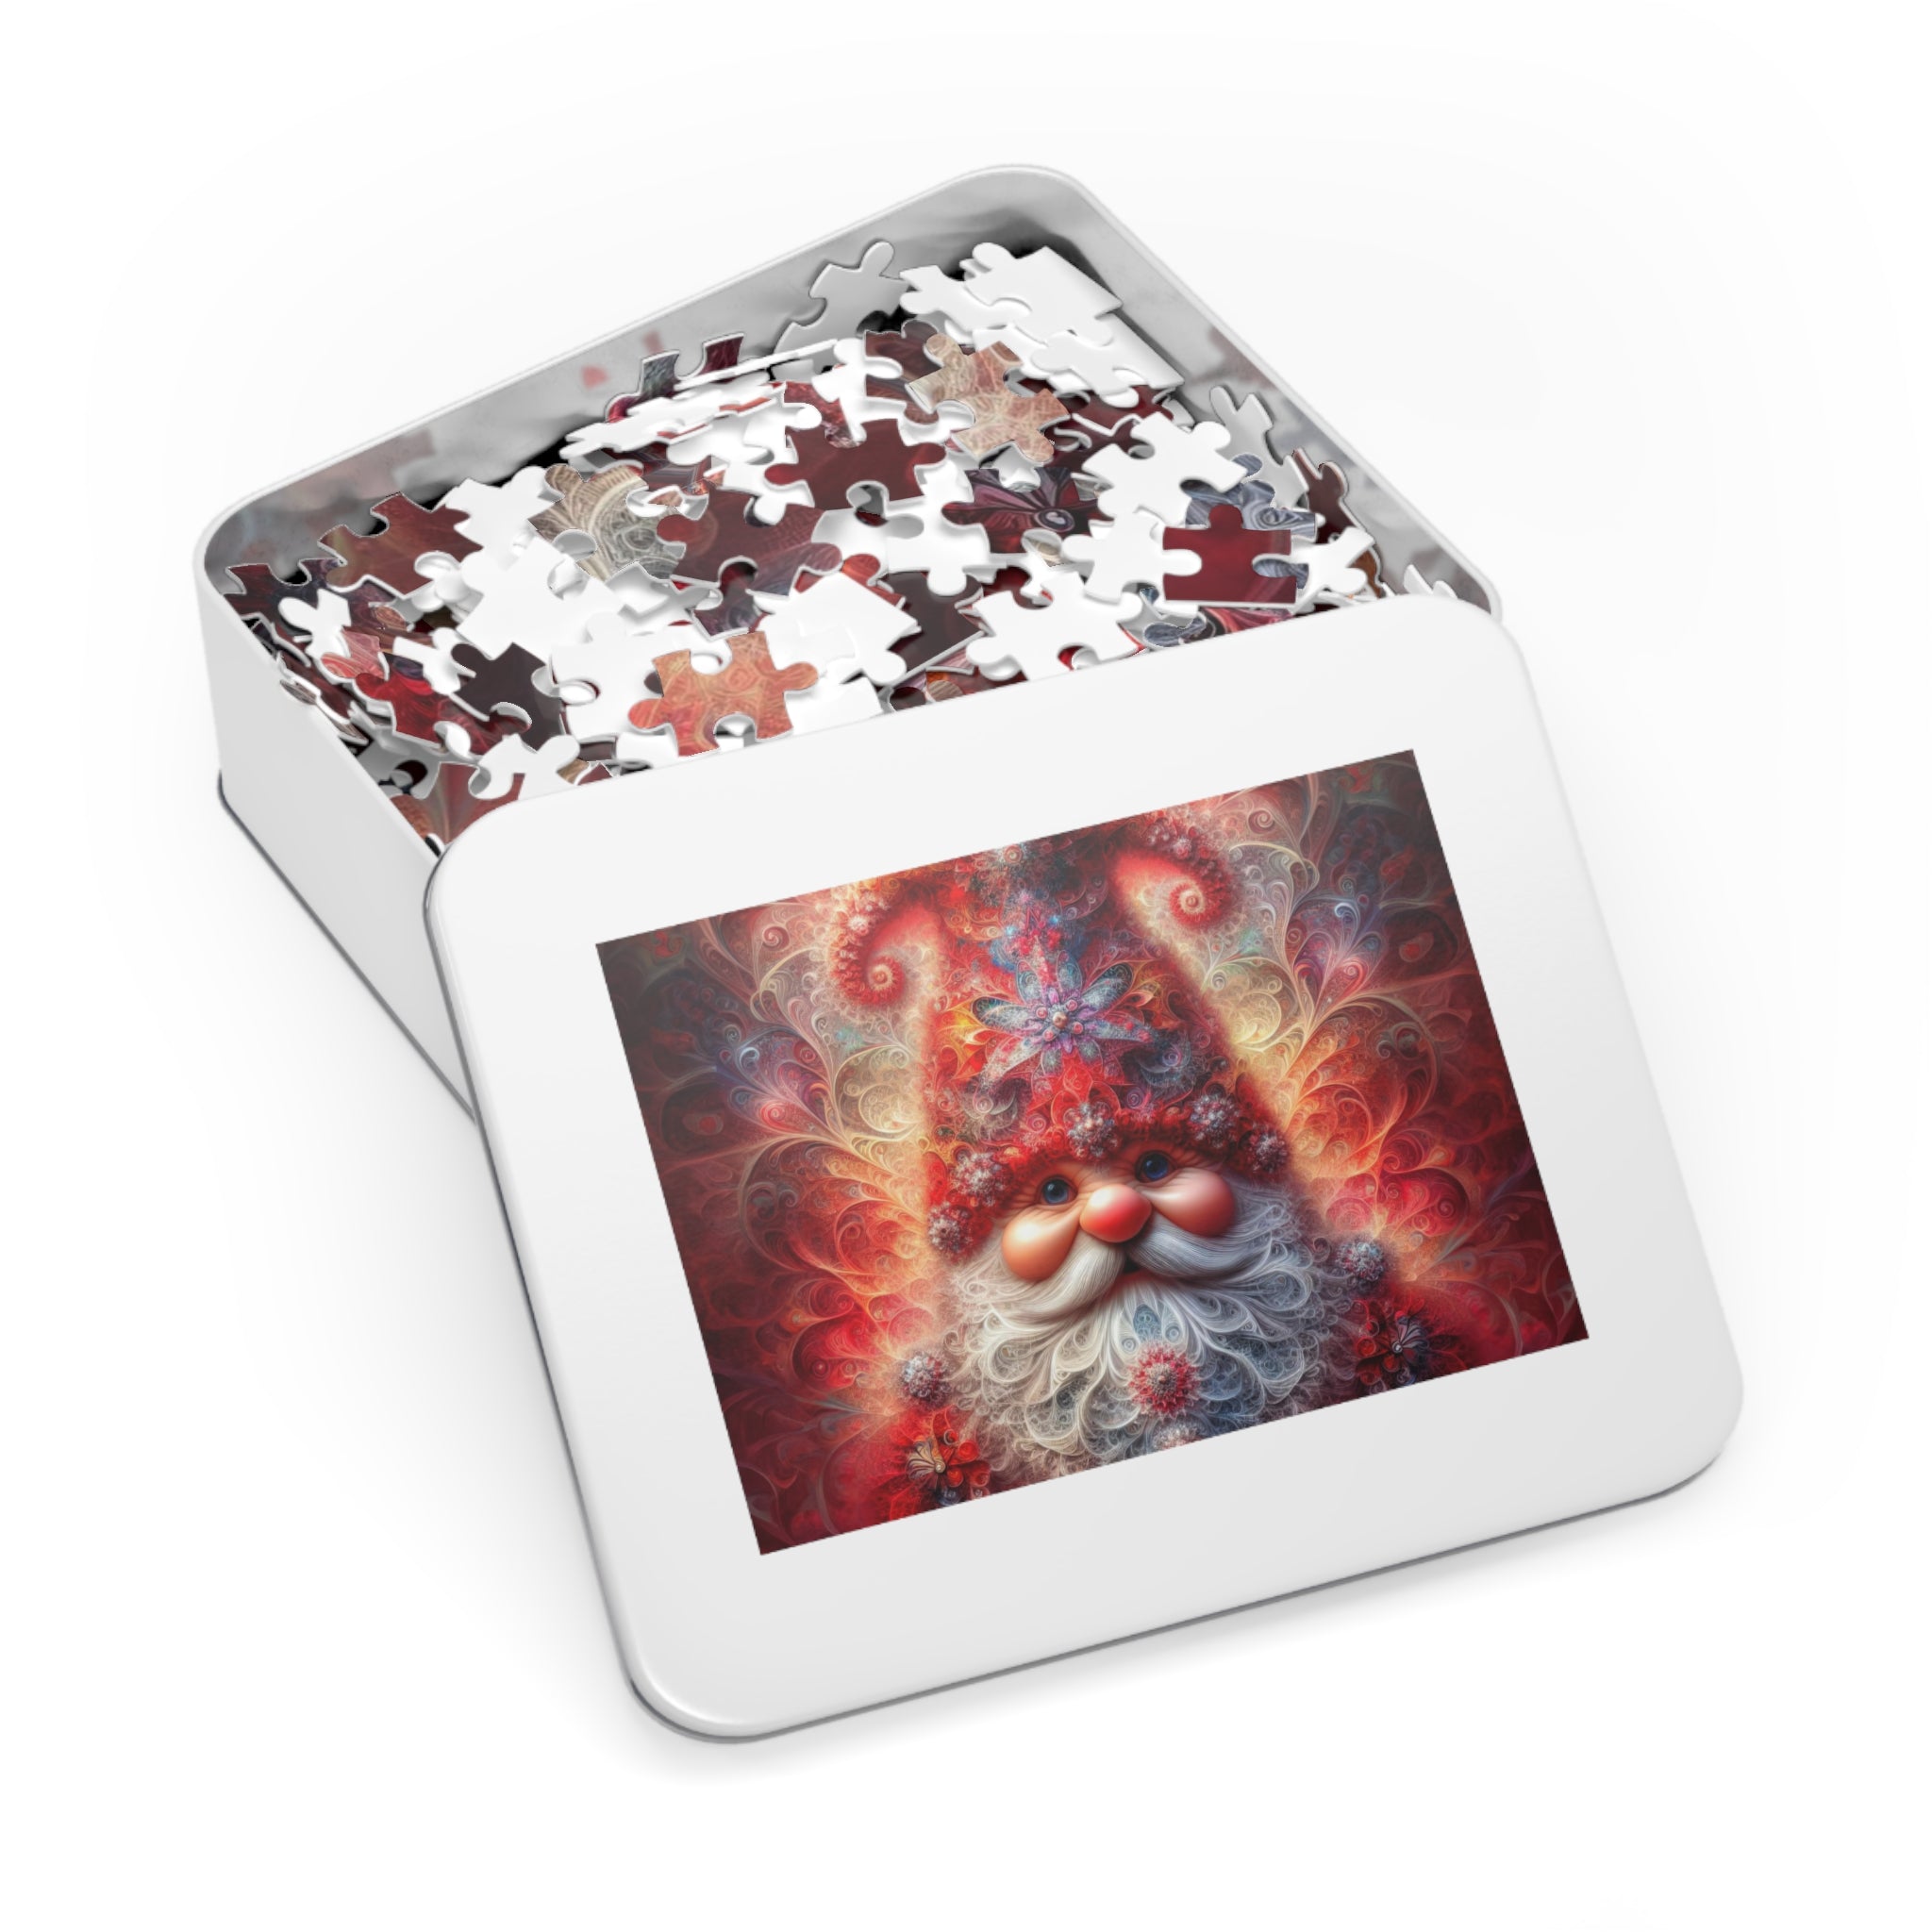 Fractal Saint of Winter Whimsy Jigsaw Puzzle